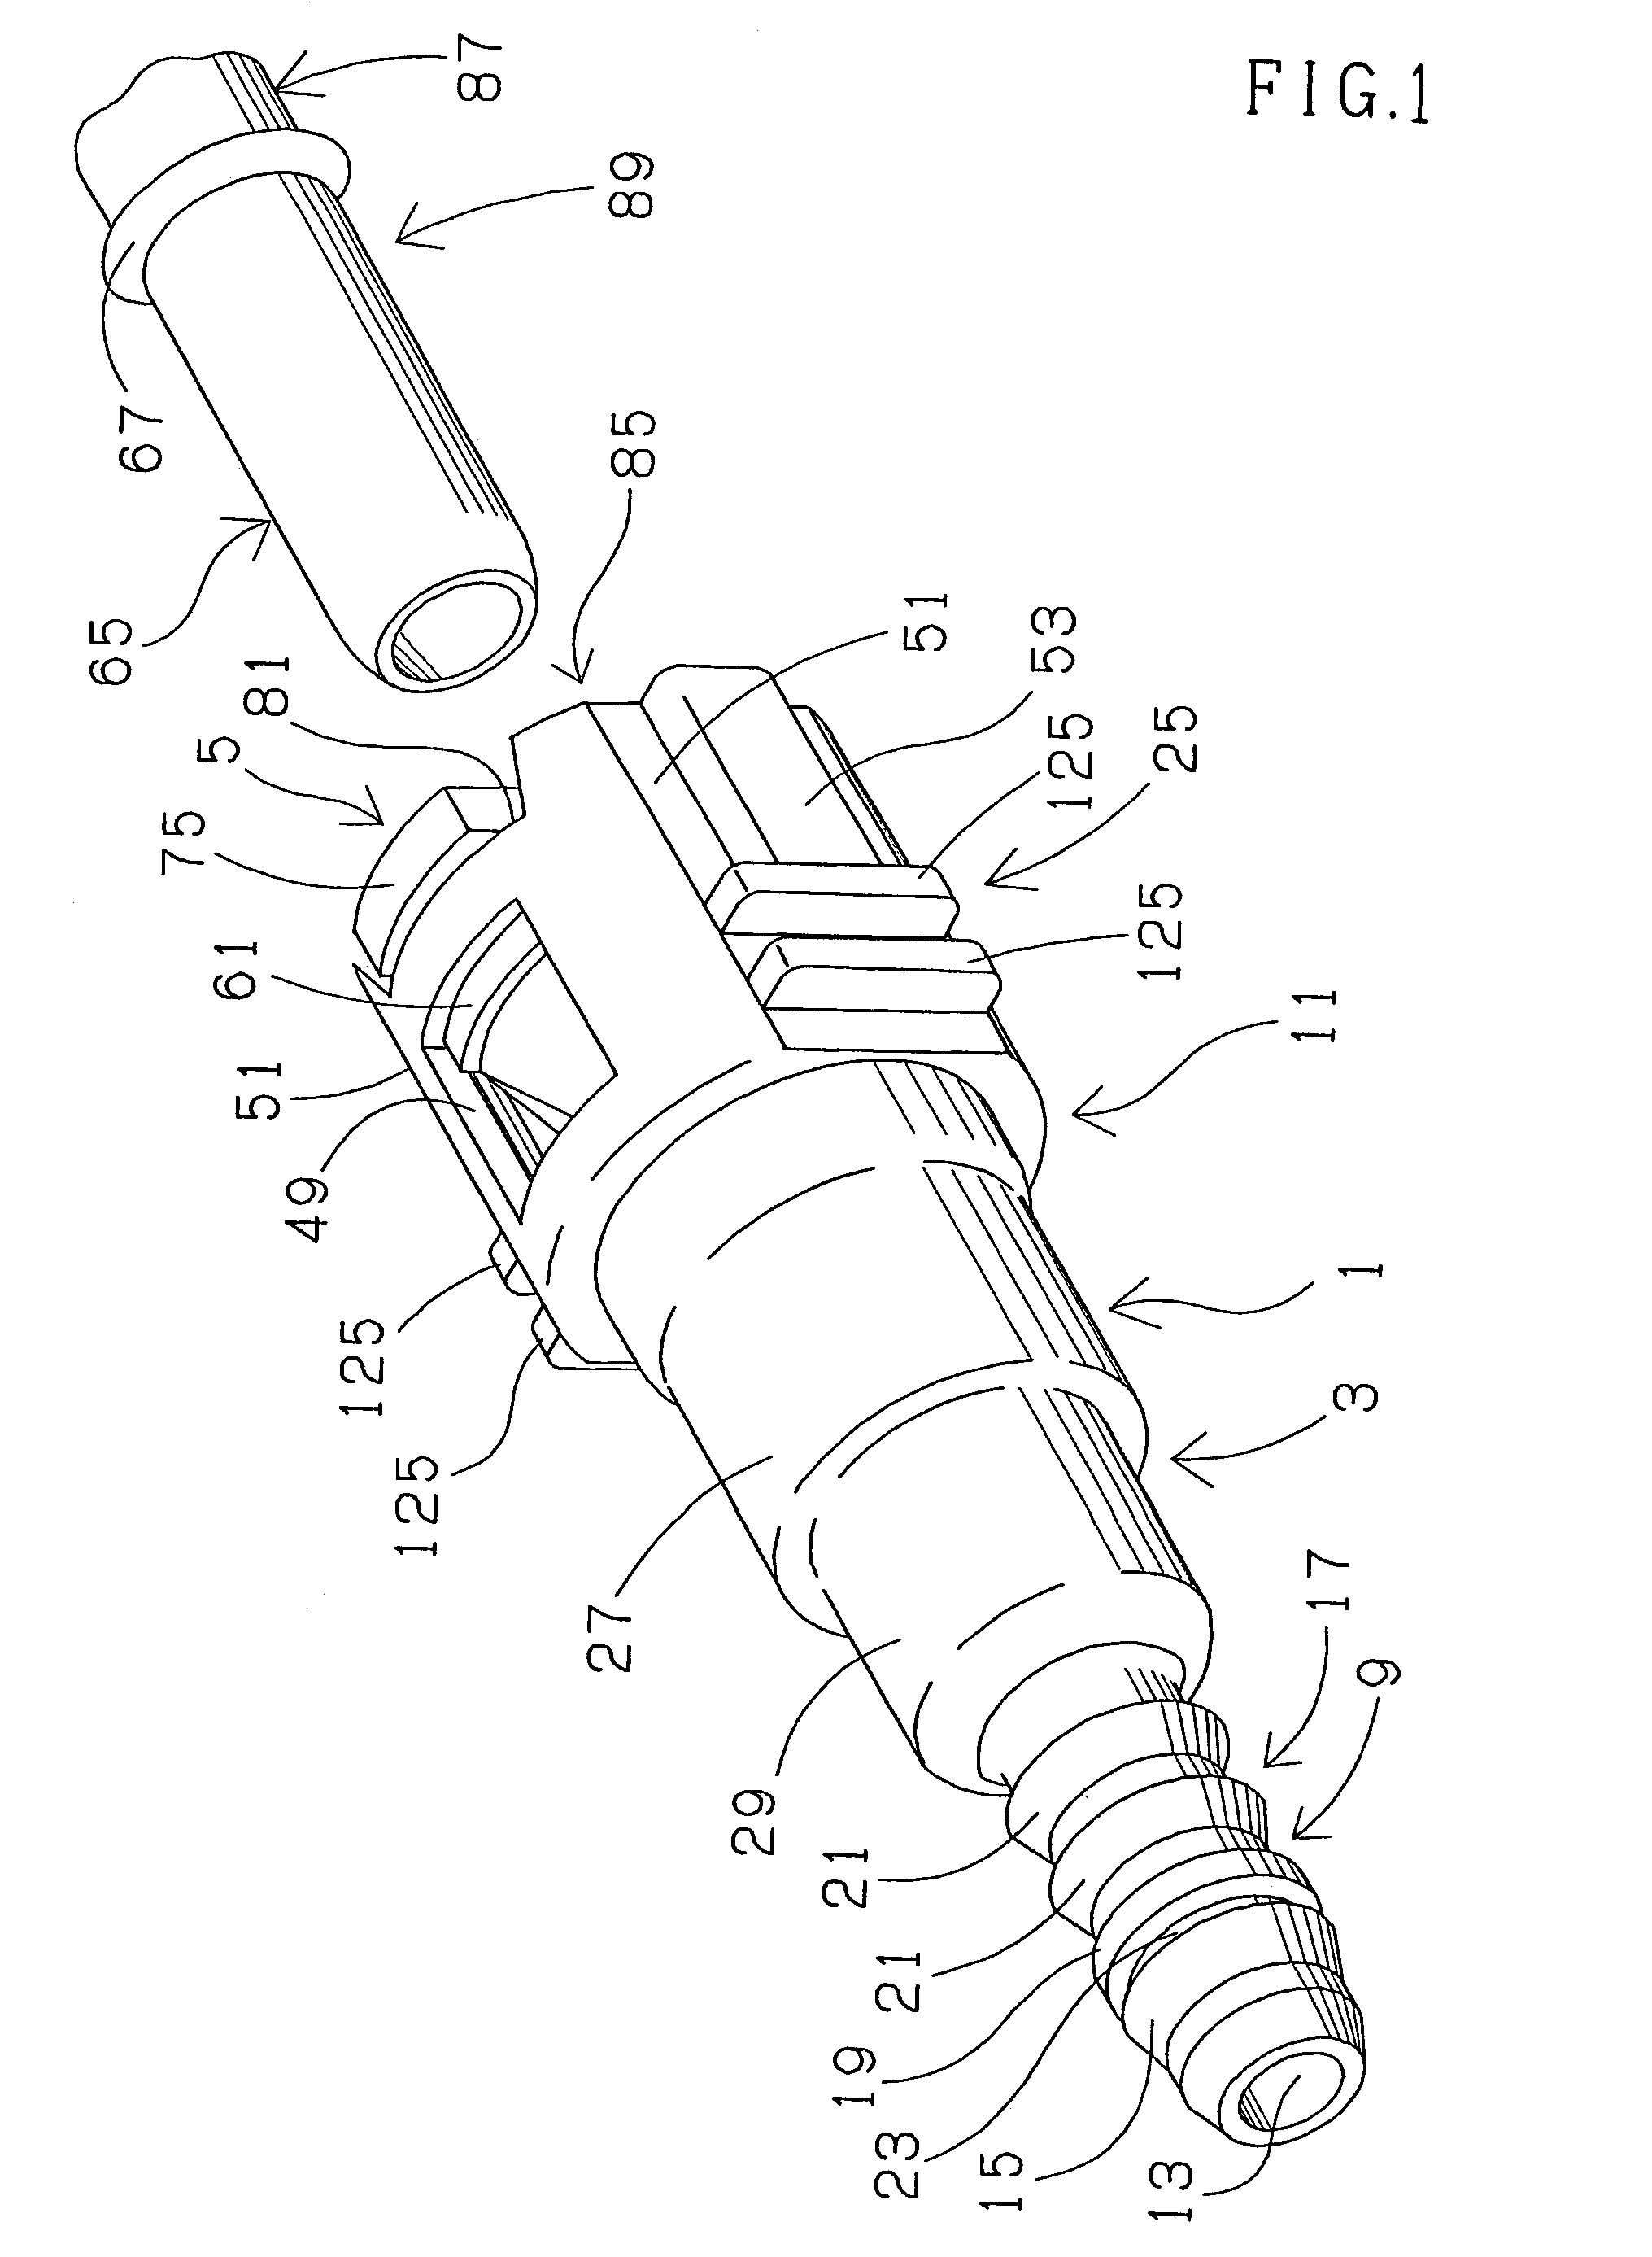 Anti-rotation device and anti-rotation structure for a pipe and a connector